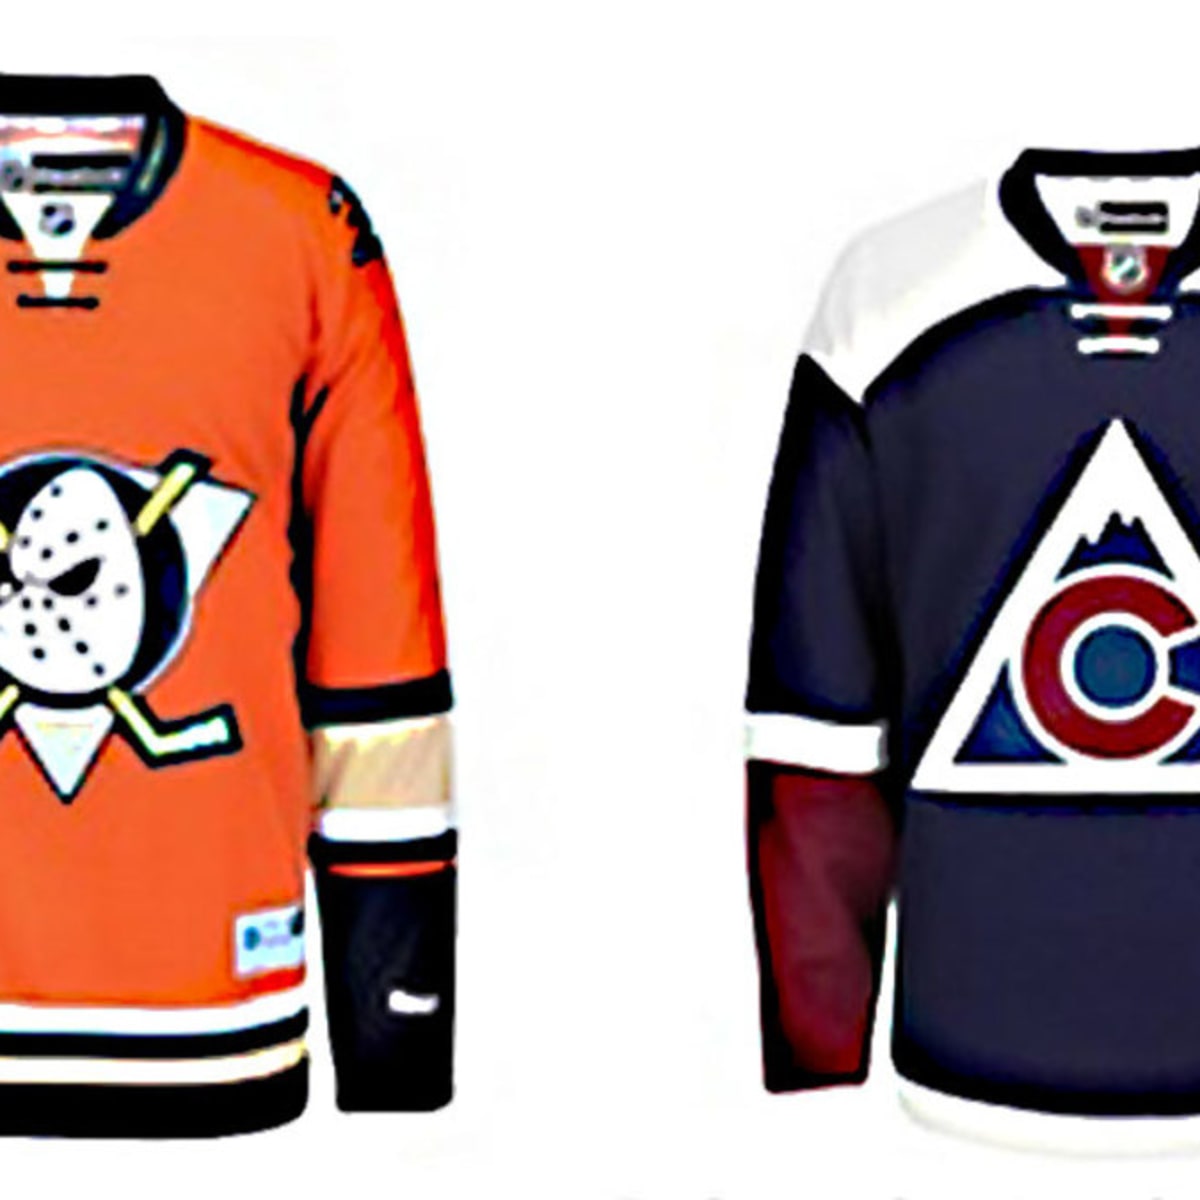 Colorado Avalanche Third Jerseys: Are they Cursed?